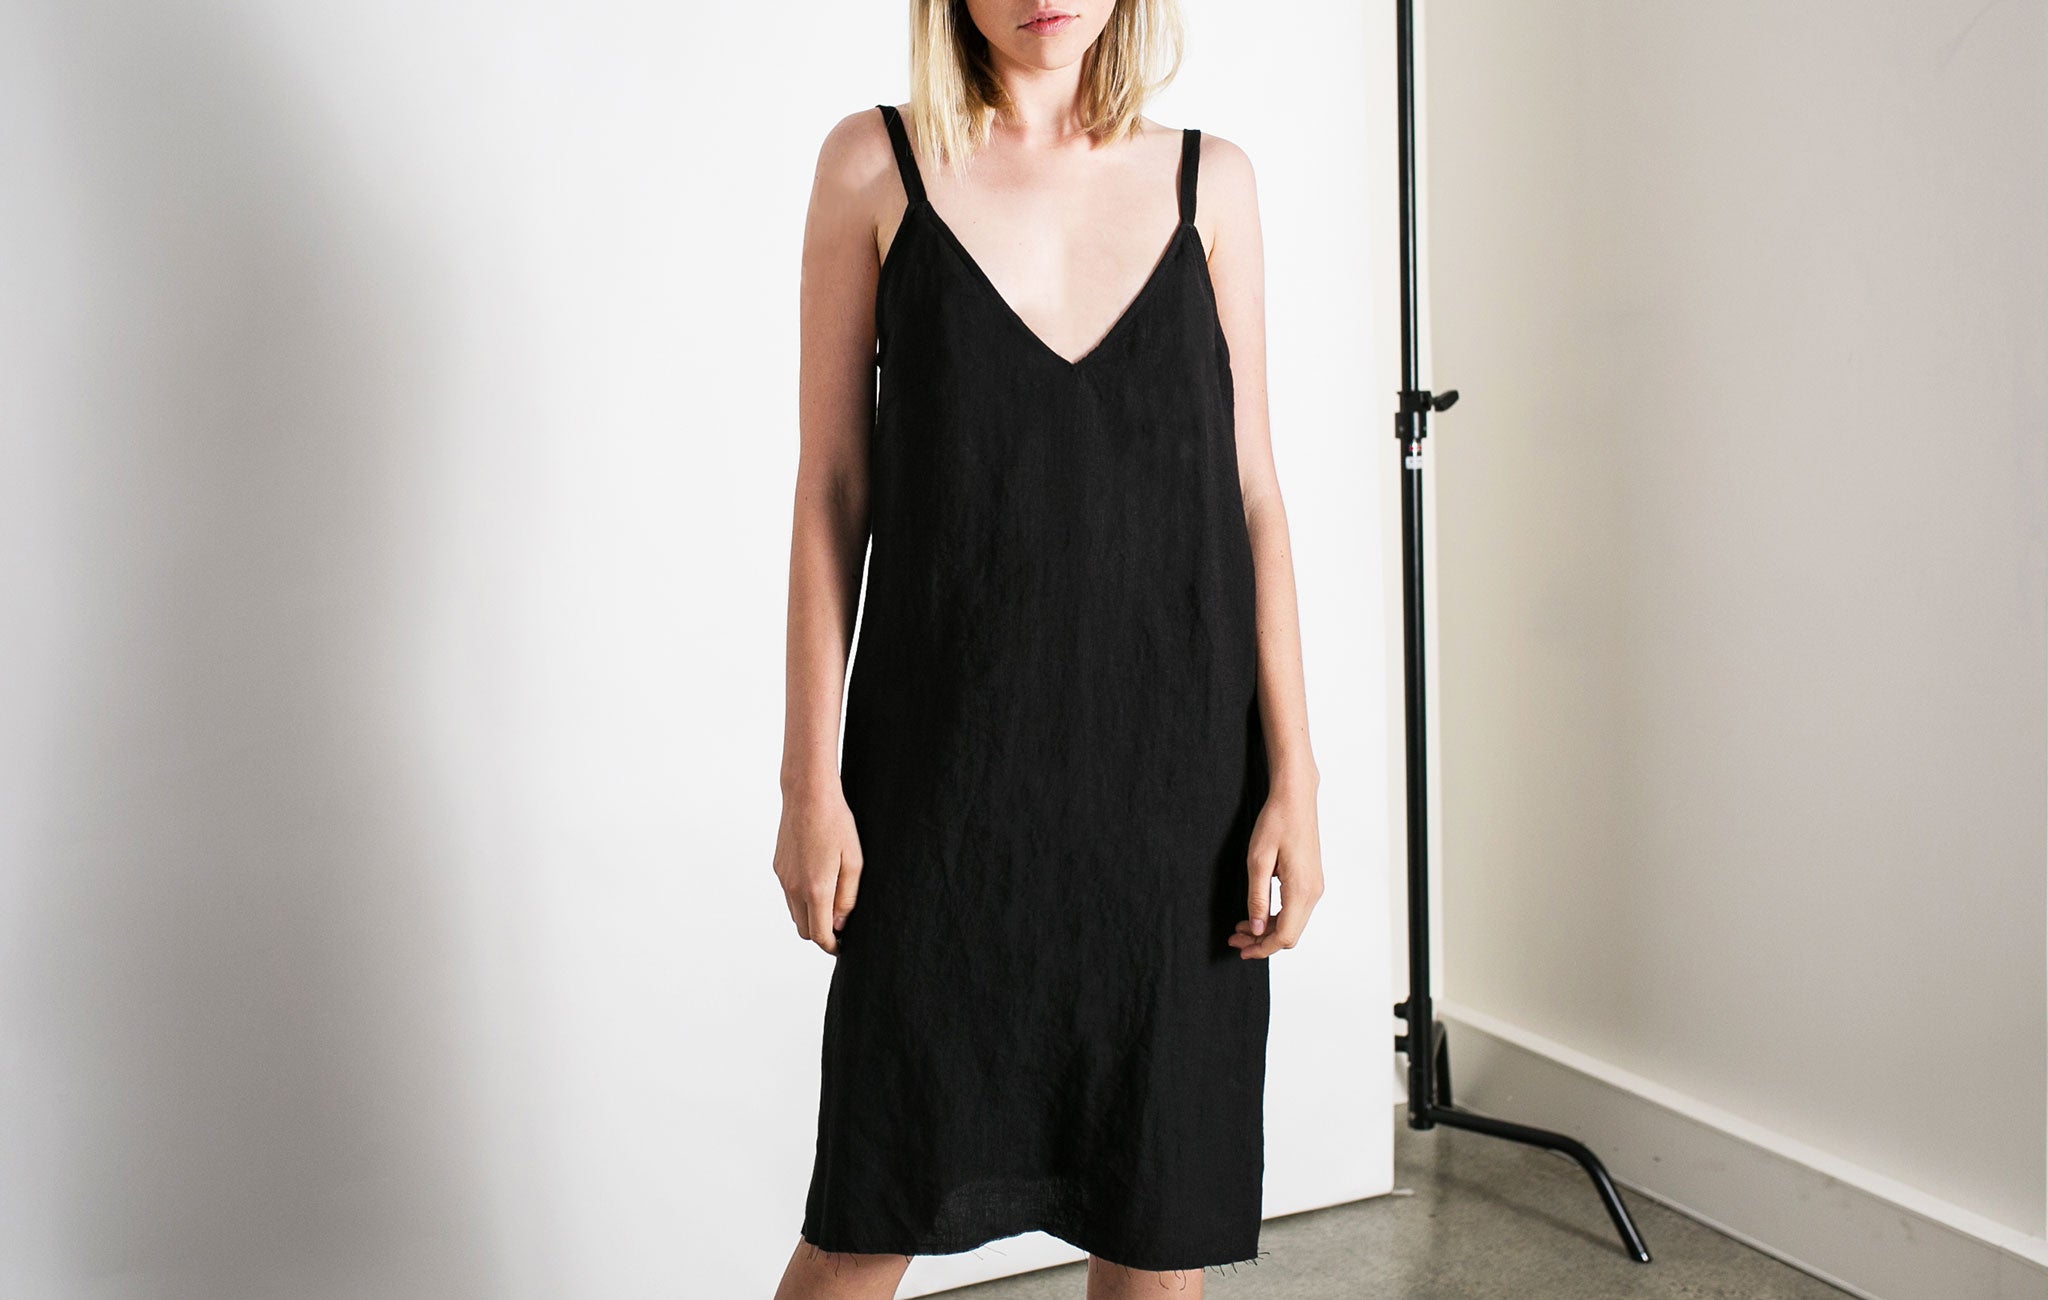 Matin V neck linen dress in black from The UNDONE 